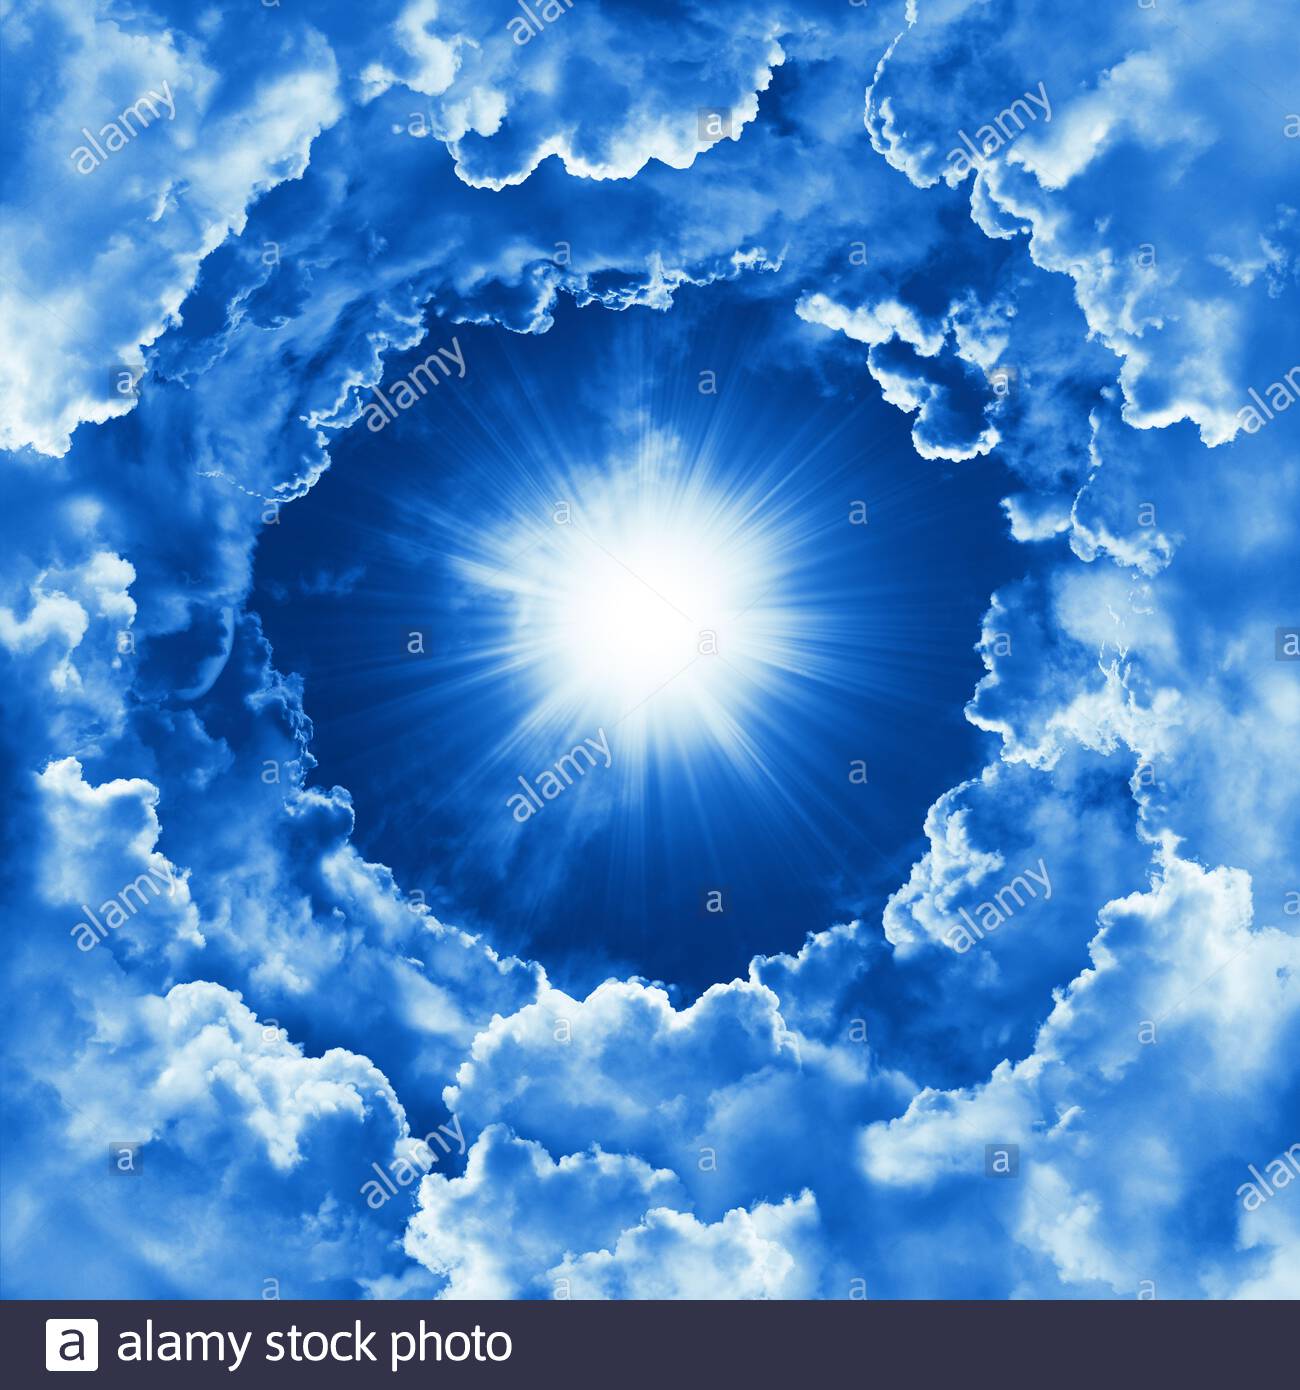 Heavenly Background With Dramatic Clouds Religion Concept Of